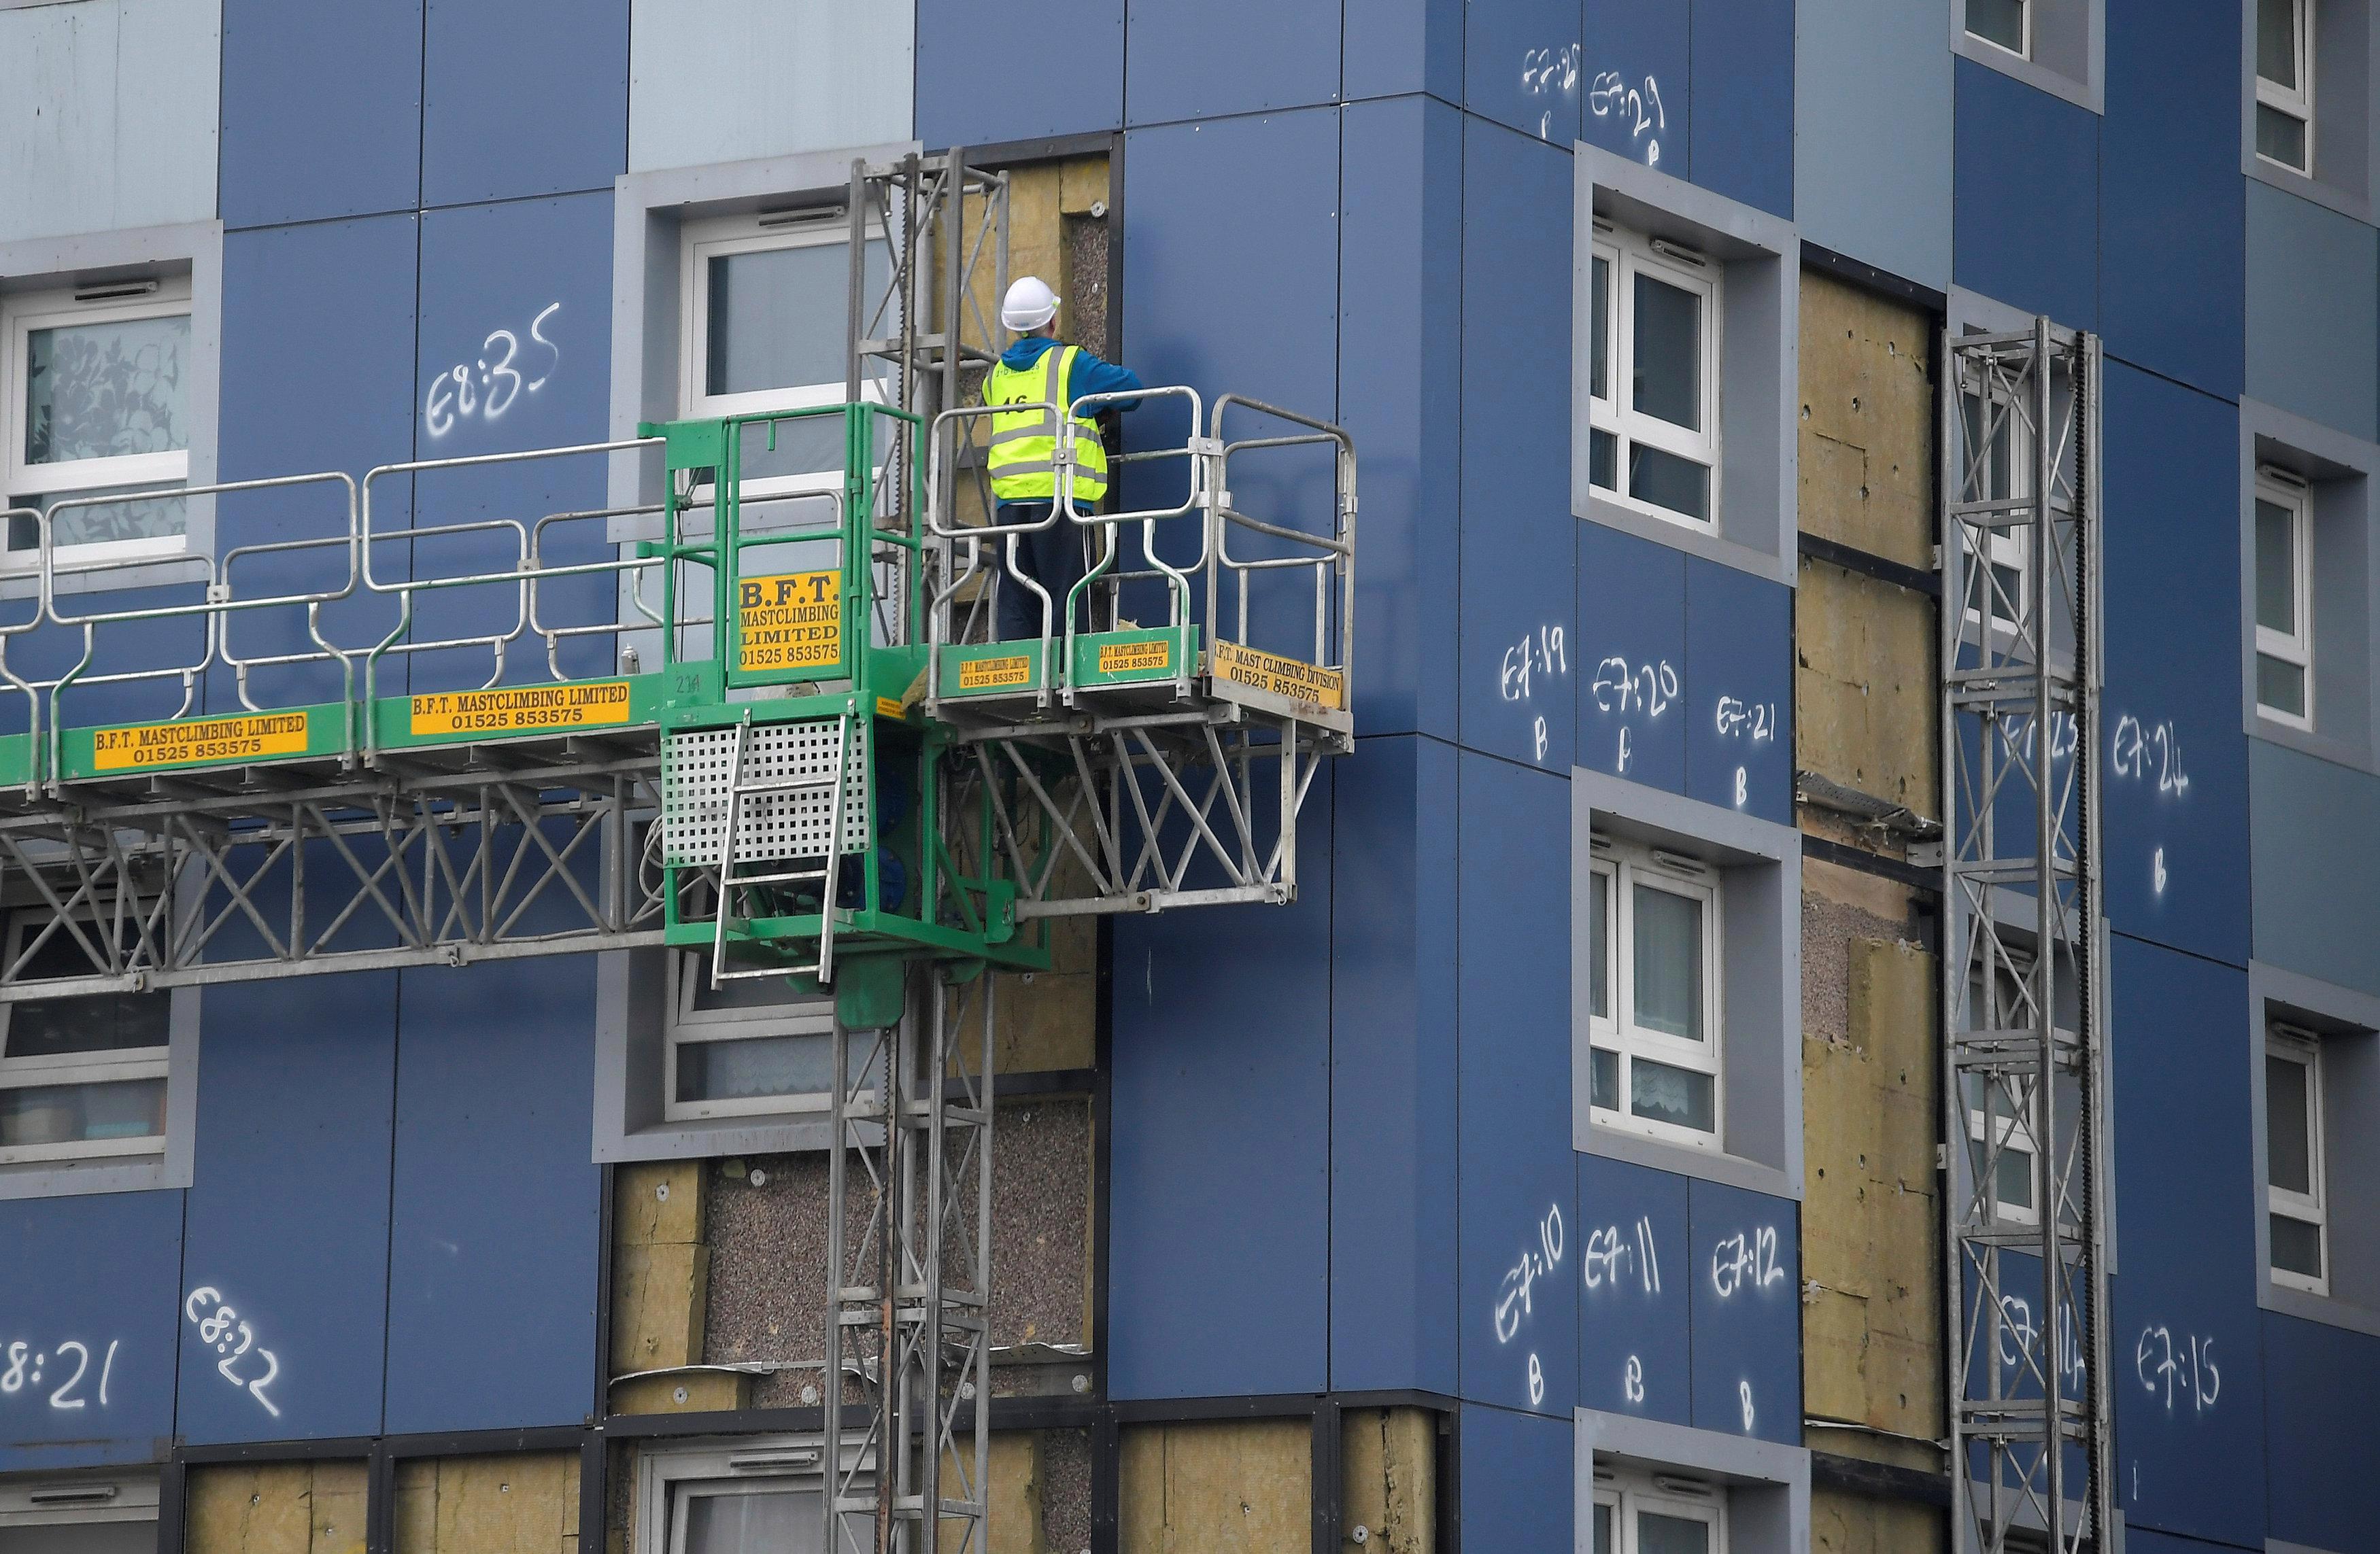 Will developers reach a satisfactory cladding deal with Michael Gove? - https://roomslocal.co.uk/blog/will-developers-reach-a-satisfactory-cladding-deal-with-michael-gove #developers #reach #satisfactory #cladding #deal